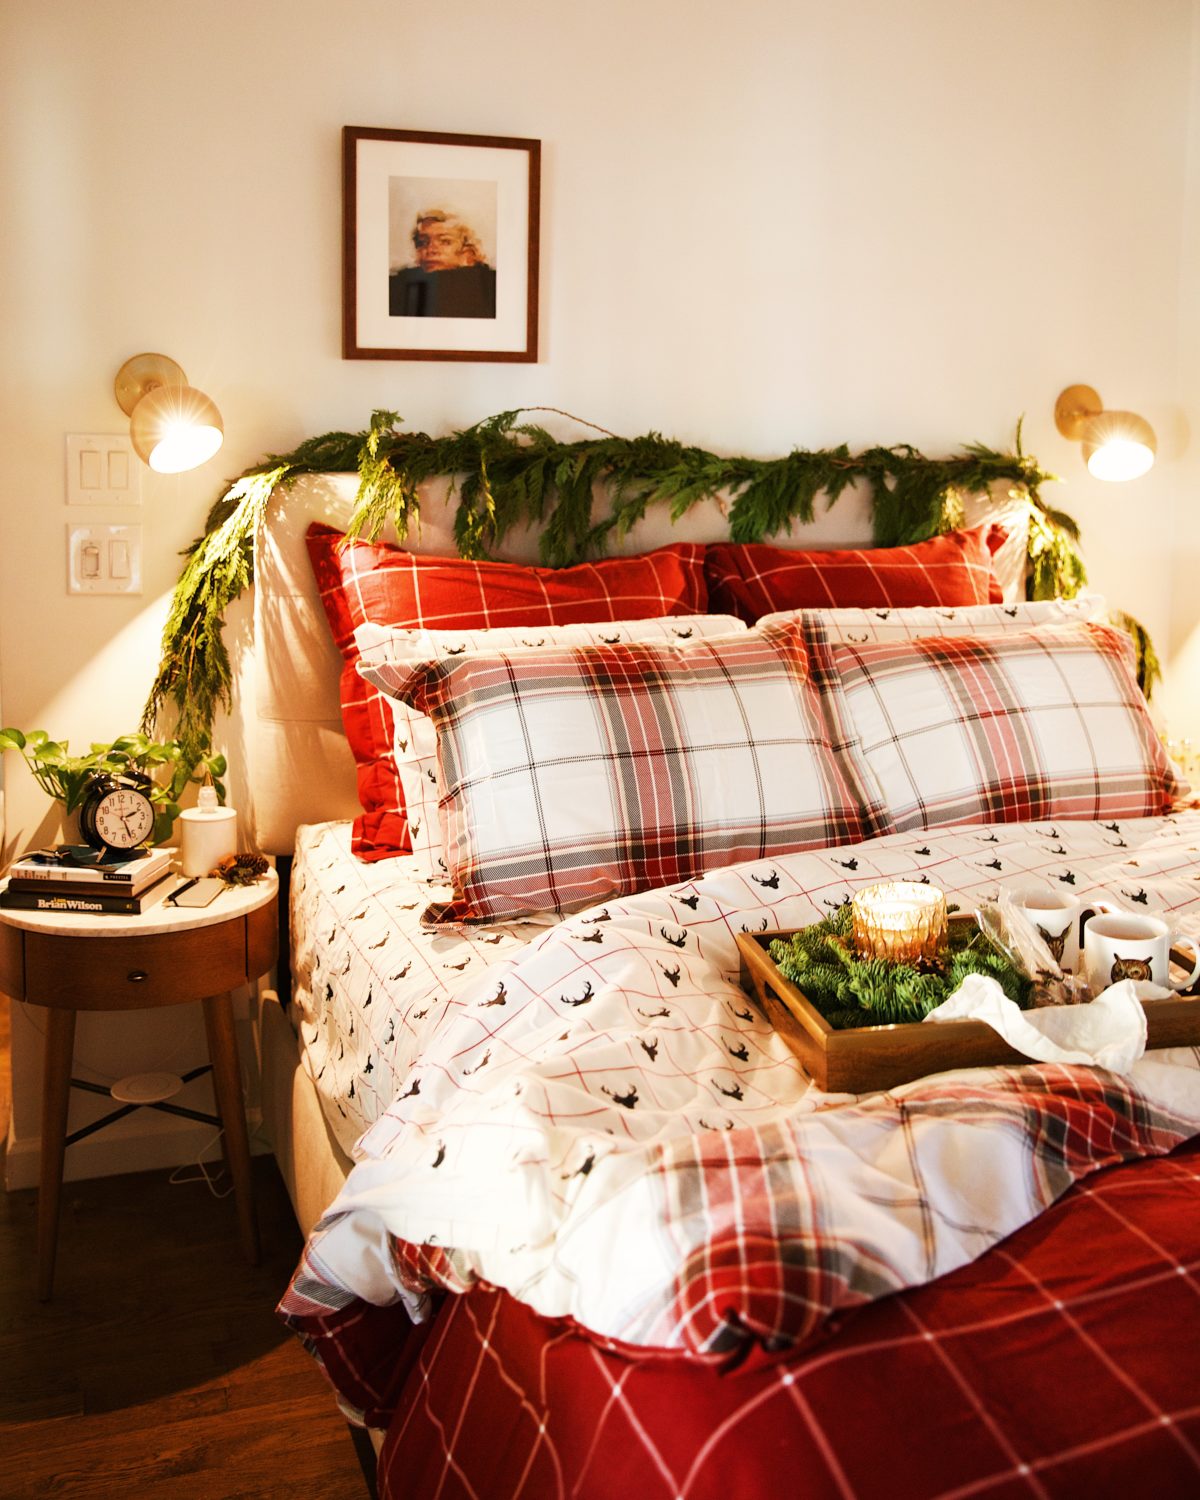 Adding Some Holiday Cheer to Your Bedroom